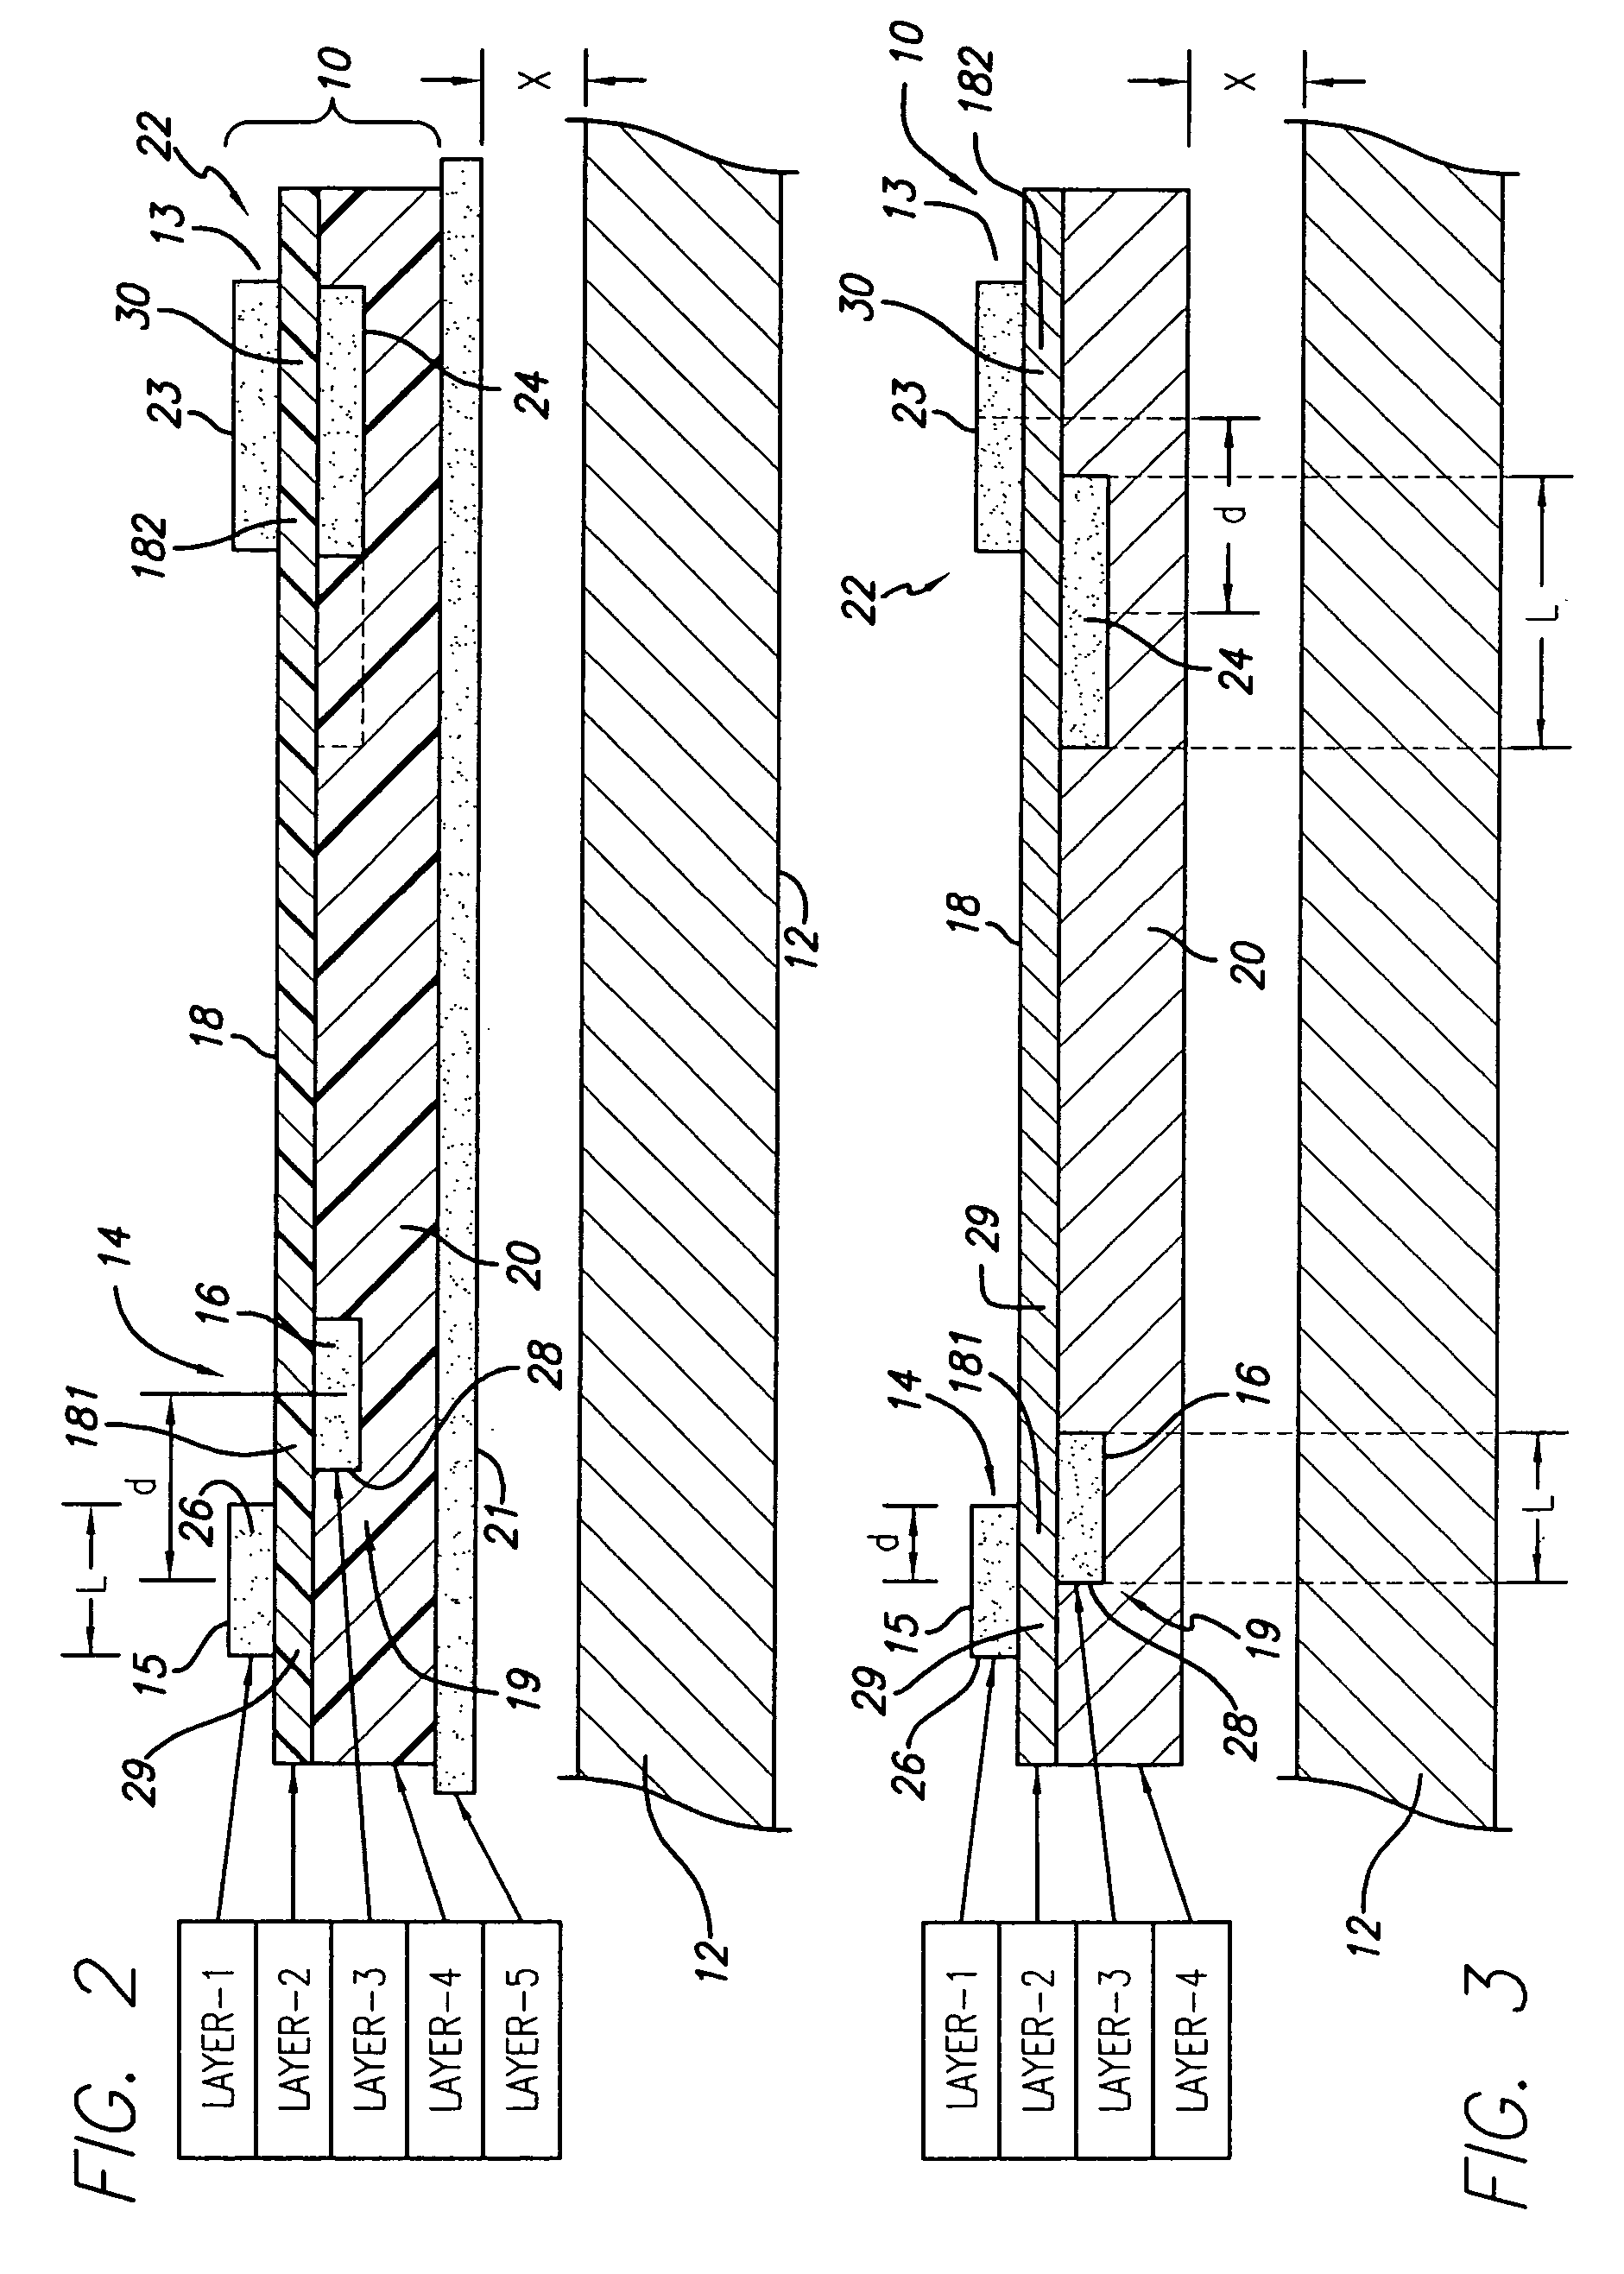 Additive-process suspension interconnect with controlled noise